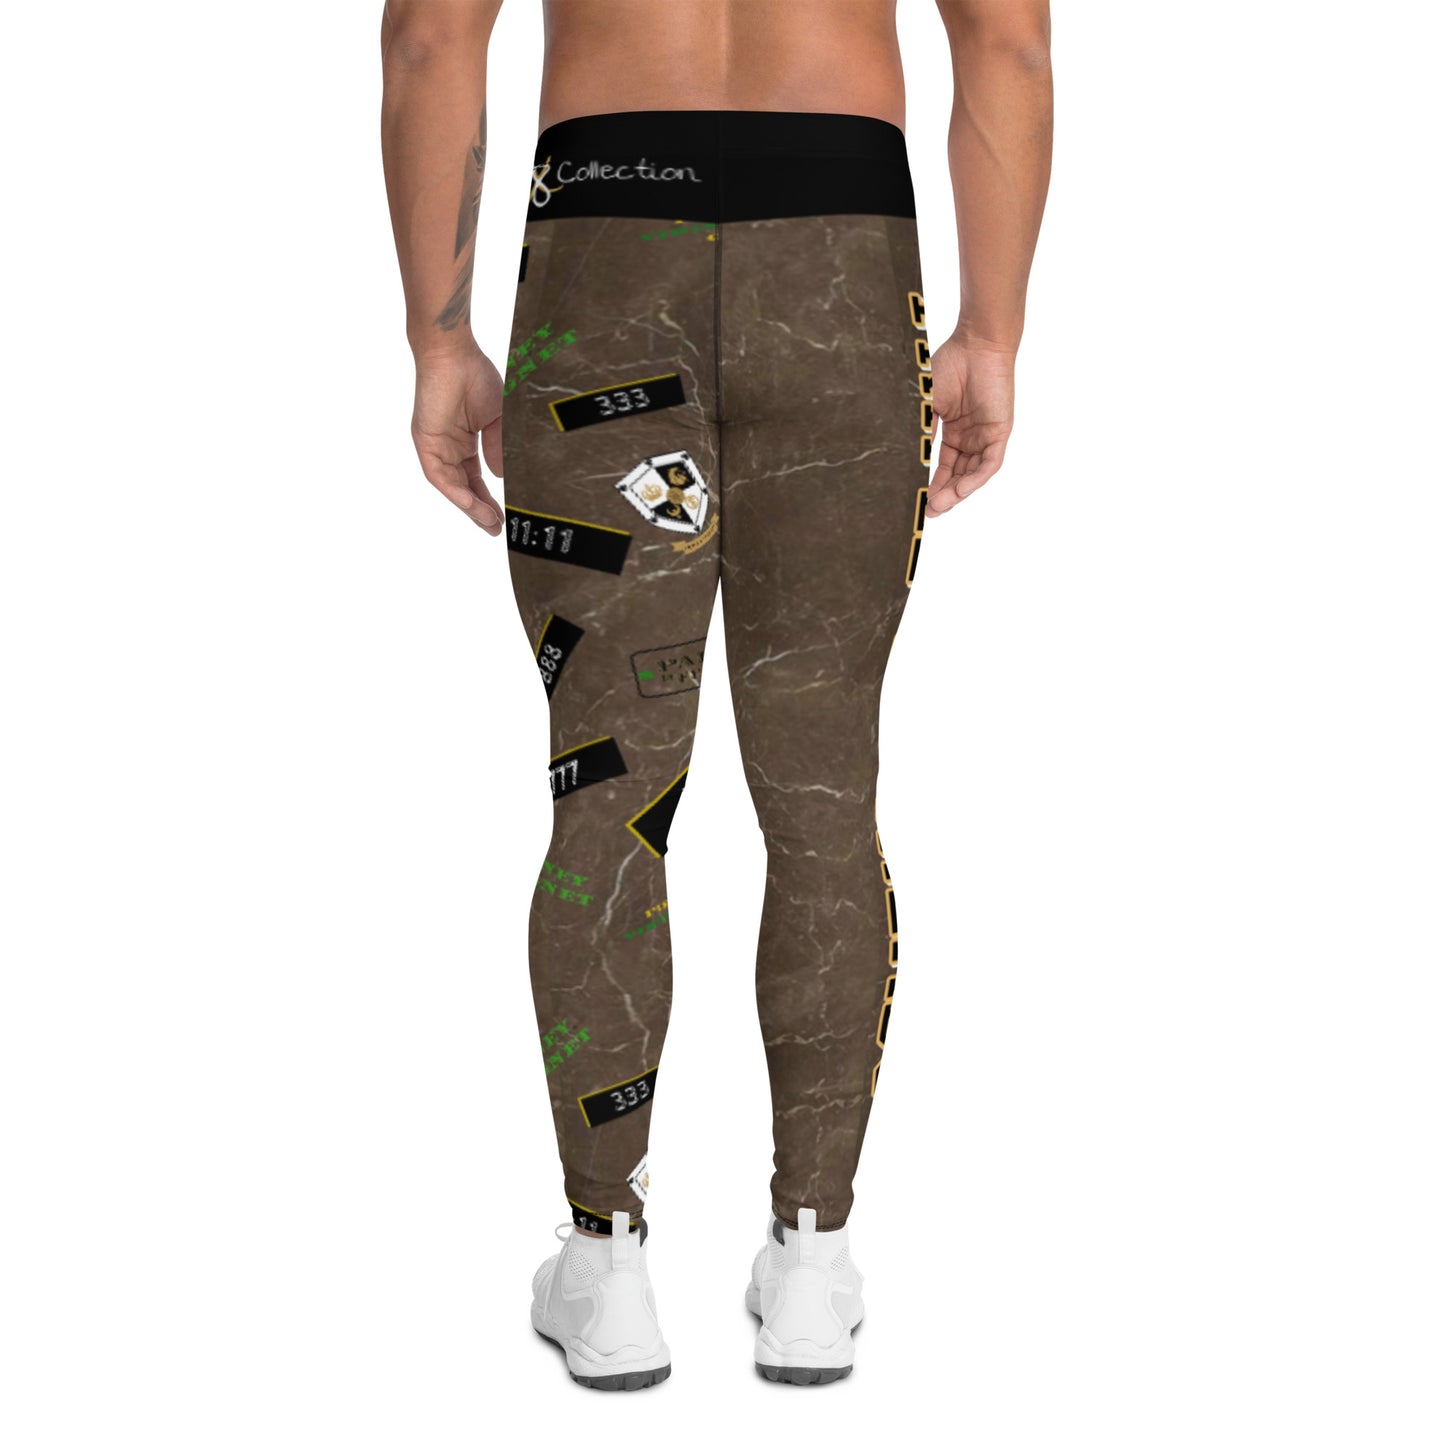 8xquiZit Collection - Men's Marble Coco-cured  Leggings